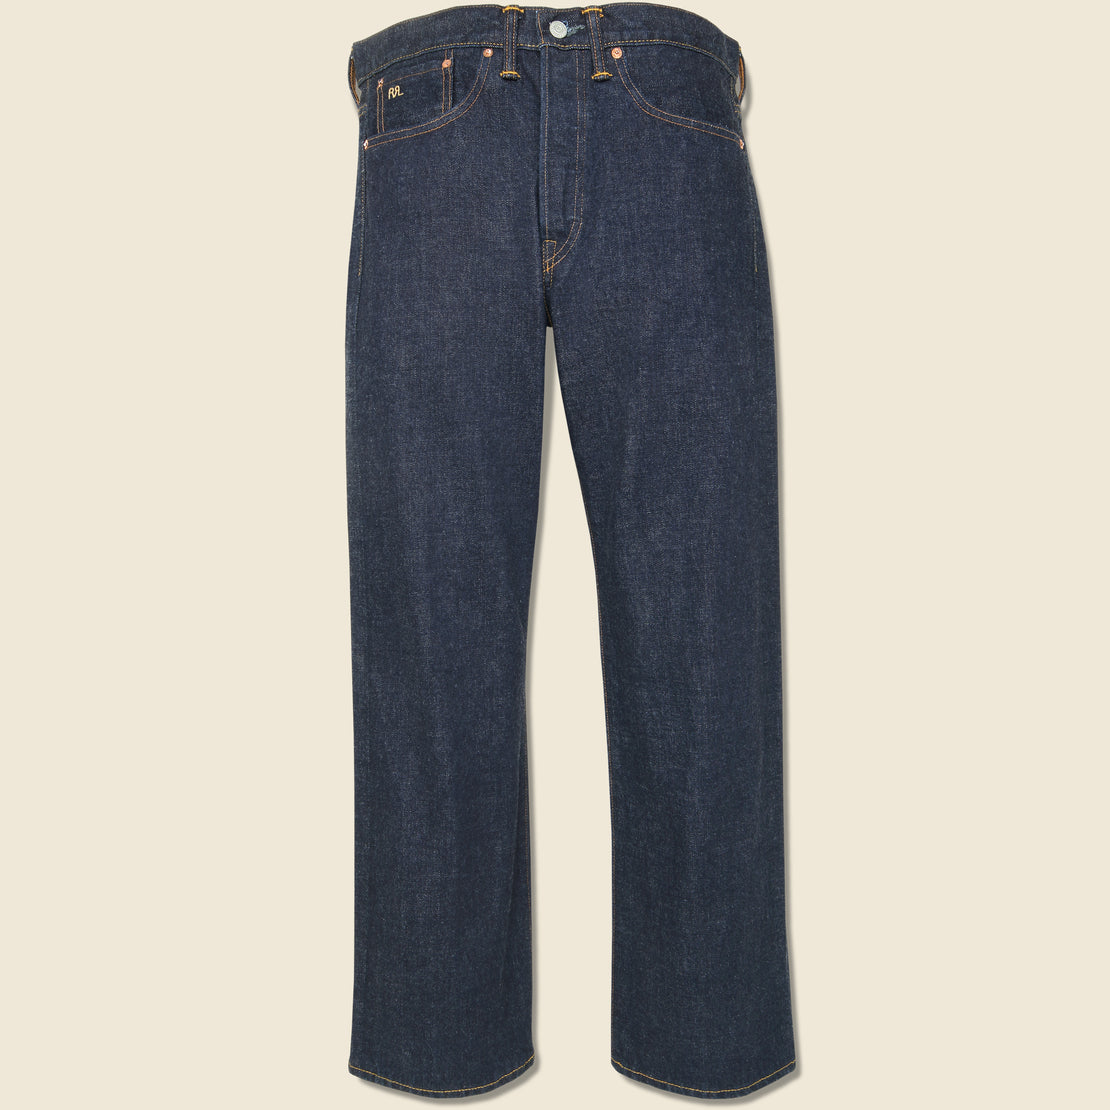 RRL Straight Fit Selvedge Jean - East/West Rinse Wash